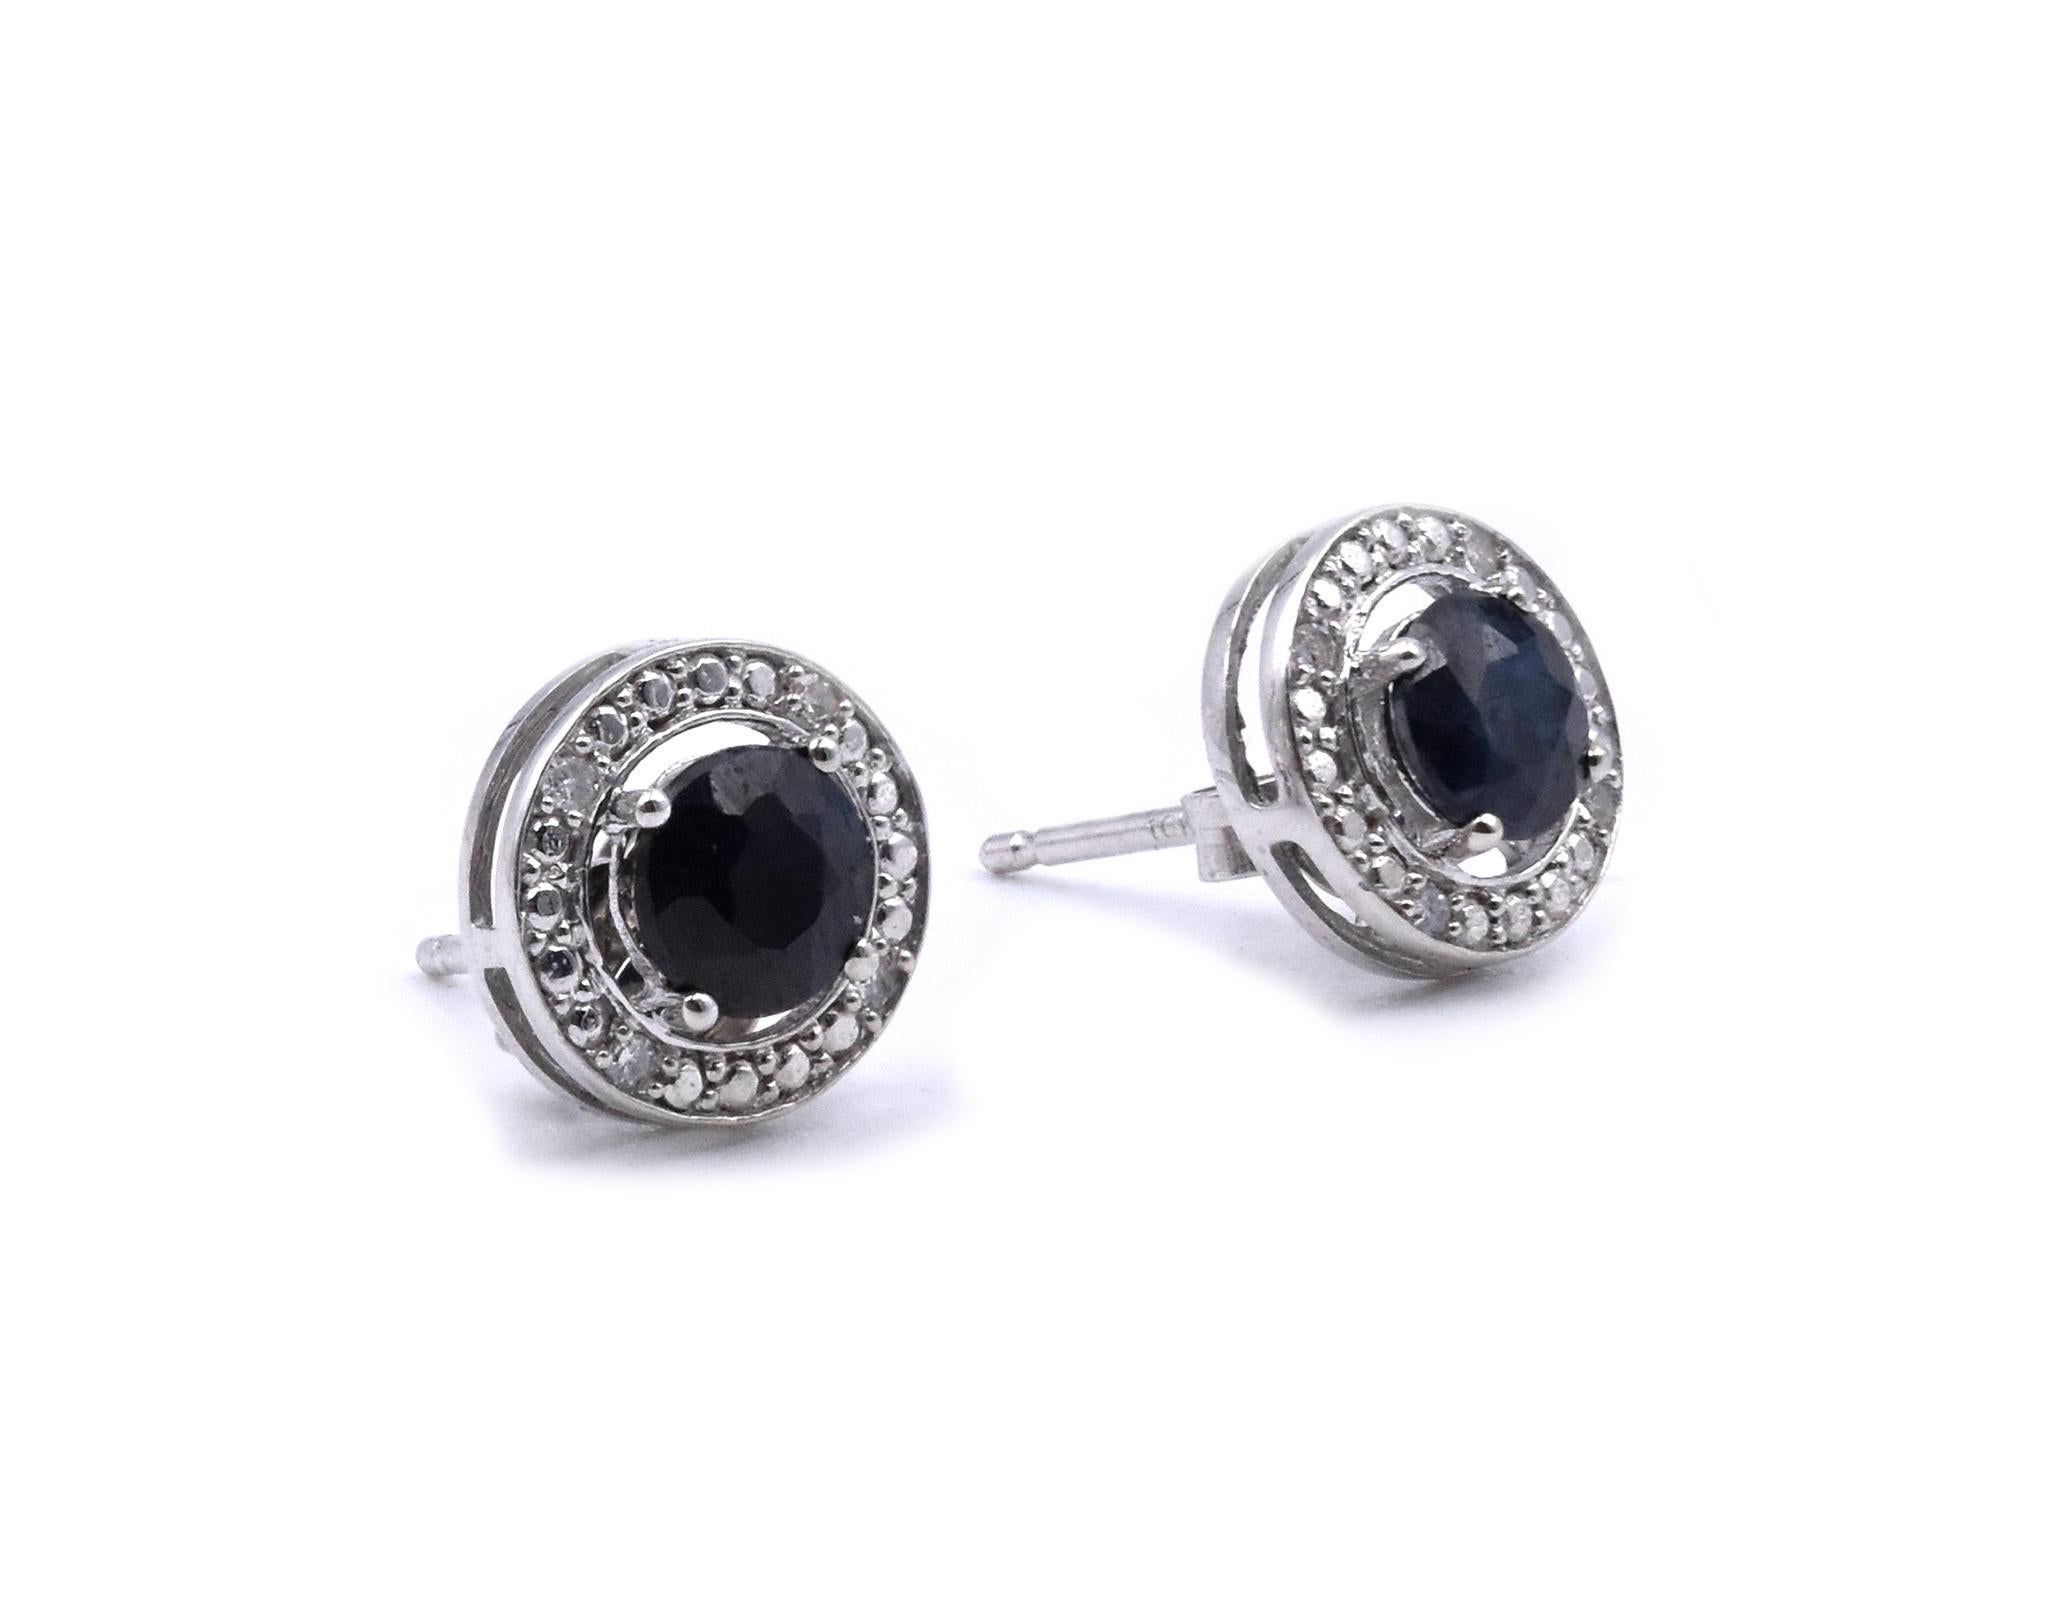 Material: 14K white gold
Diamond: 8 round cut =.08cttw
Color: H
Clarity: SI2
Sapphire: 2 round cut = .50cttw
Fastenings: post with friction backs
Measurements: earrings measure 7.50mm
Weight:  .82 grams	
